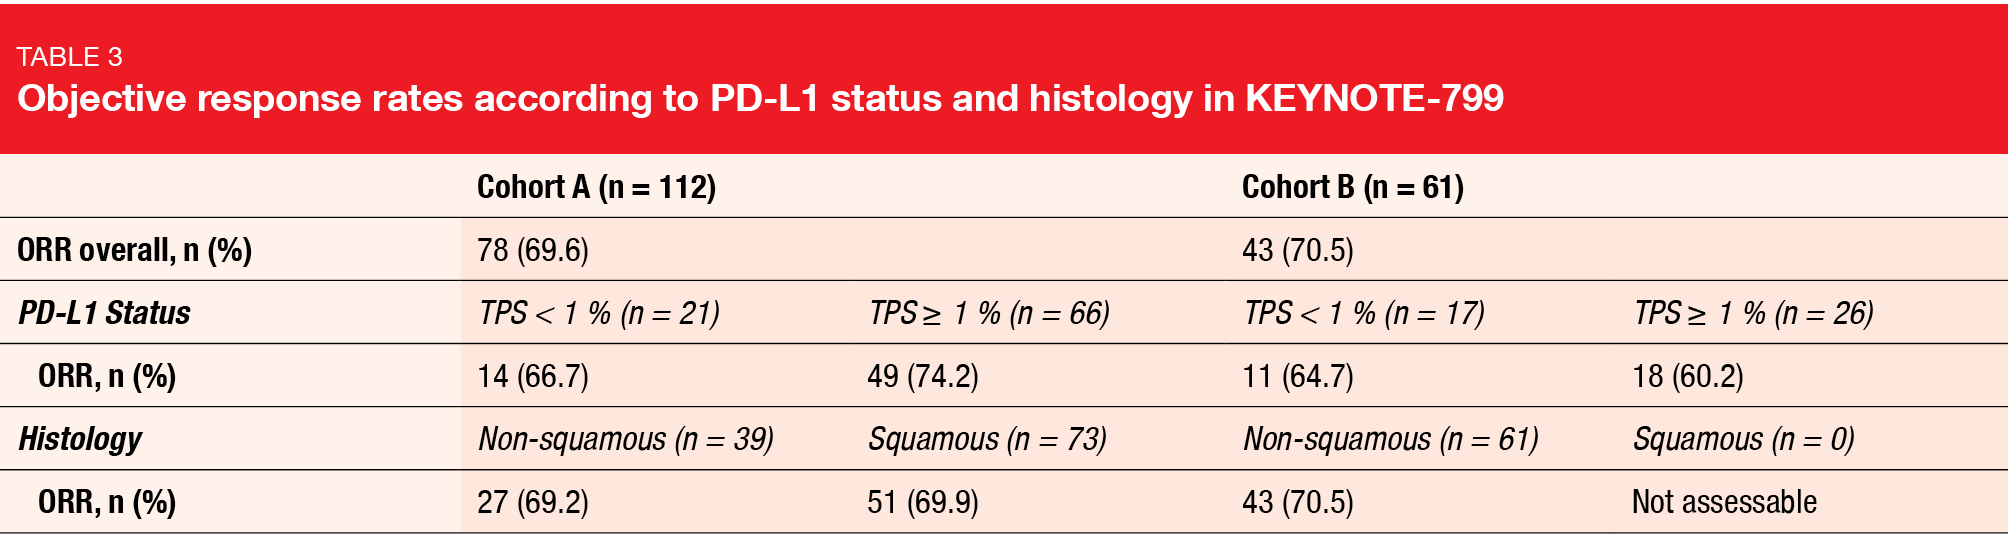 Table 3: Objective response rates according to PD-L1 status and histology in KEYNOTE-799